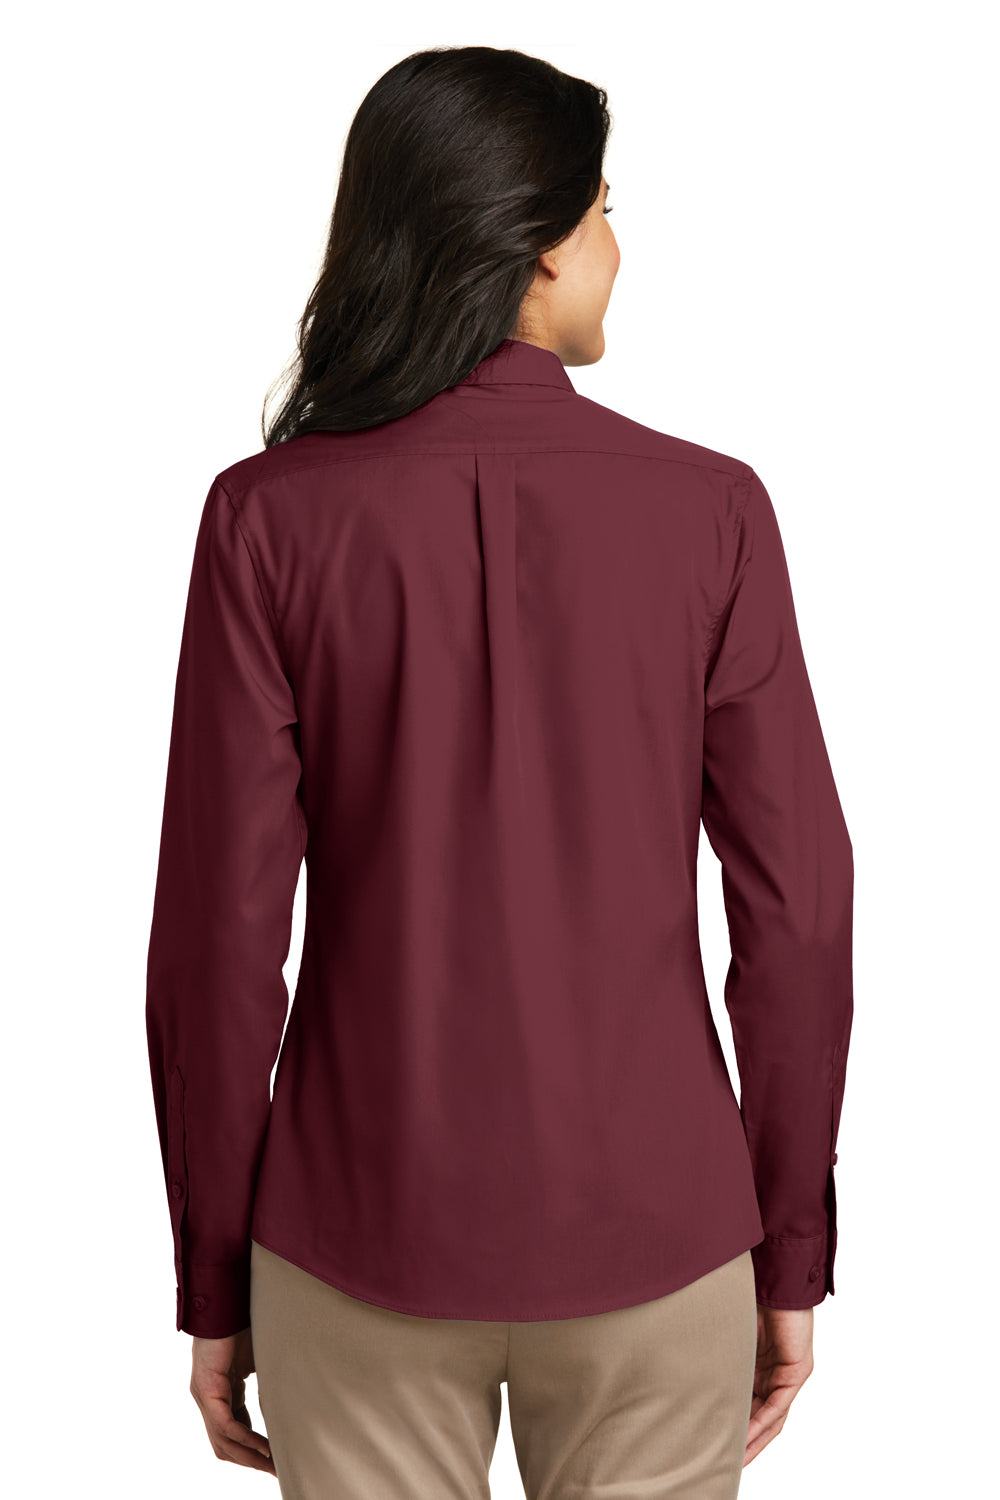 Port Authority LW100 Womens Carefree Stain Resistant Long Sleeve Button Down Shirt Burgundy Back